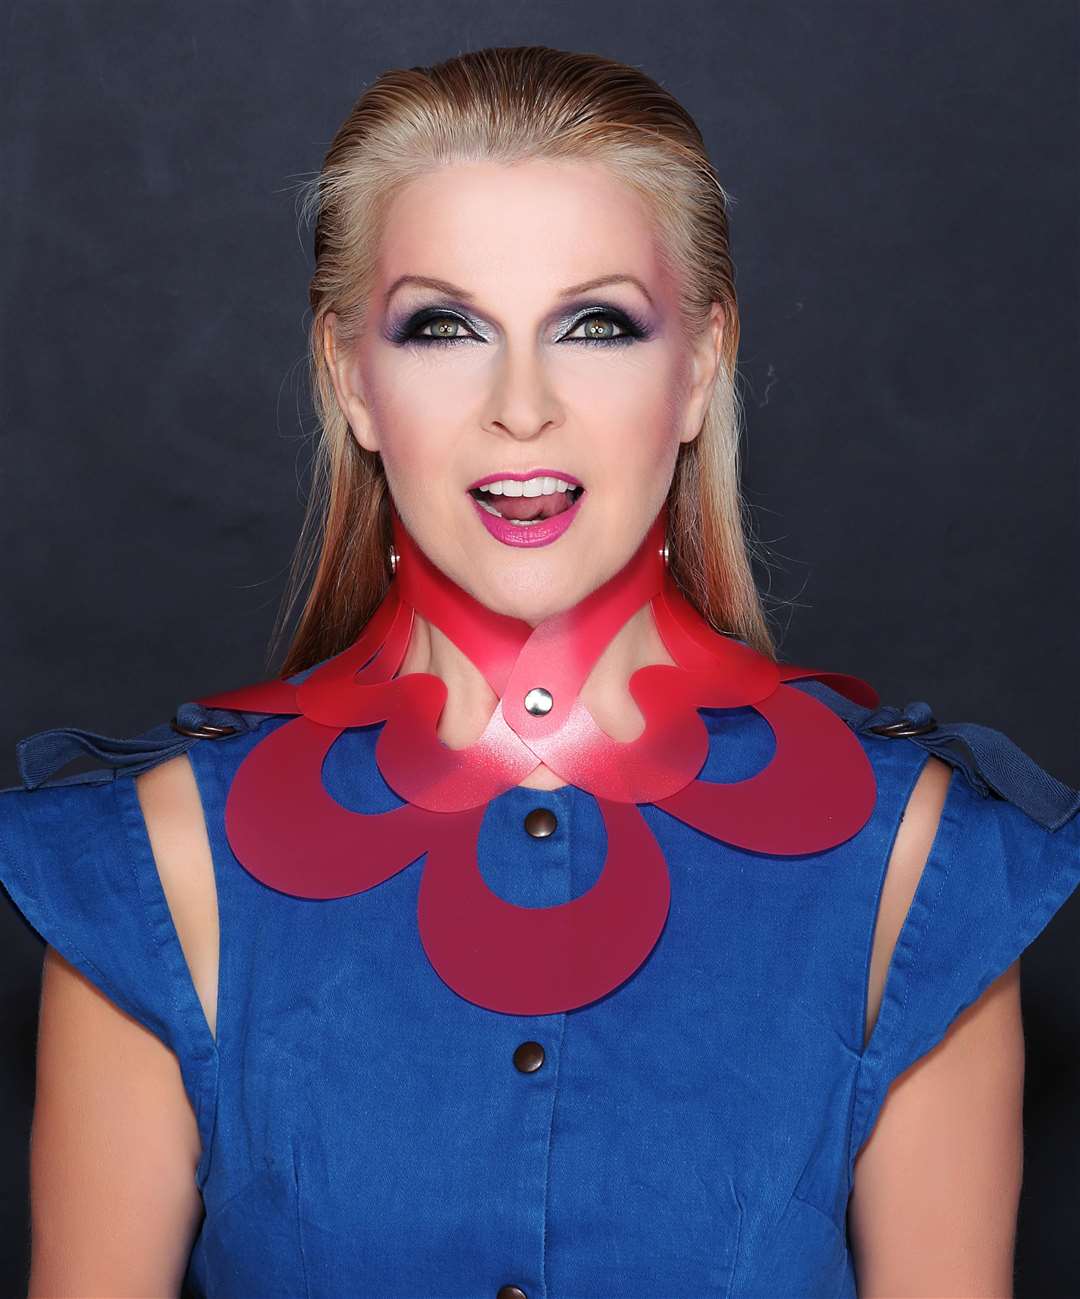 Toyah will be at the Glassbox Theatre Picture: AGMP